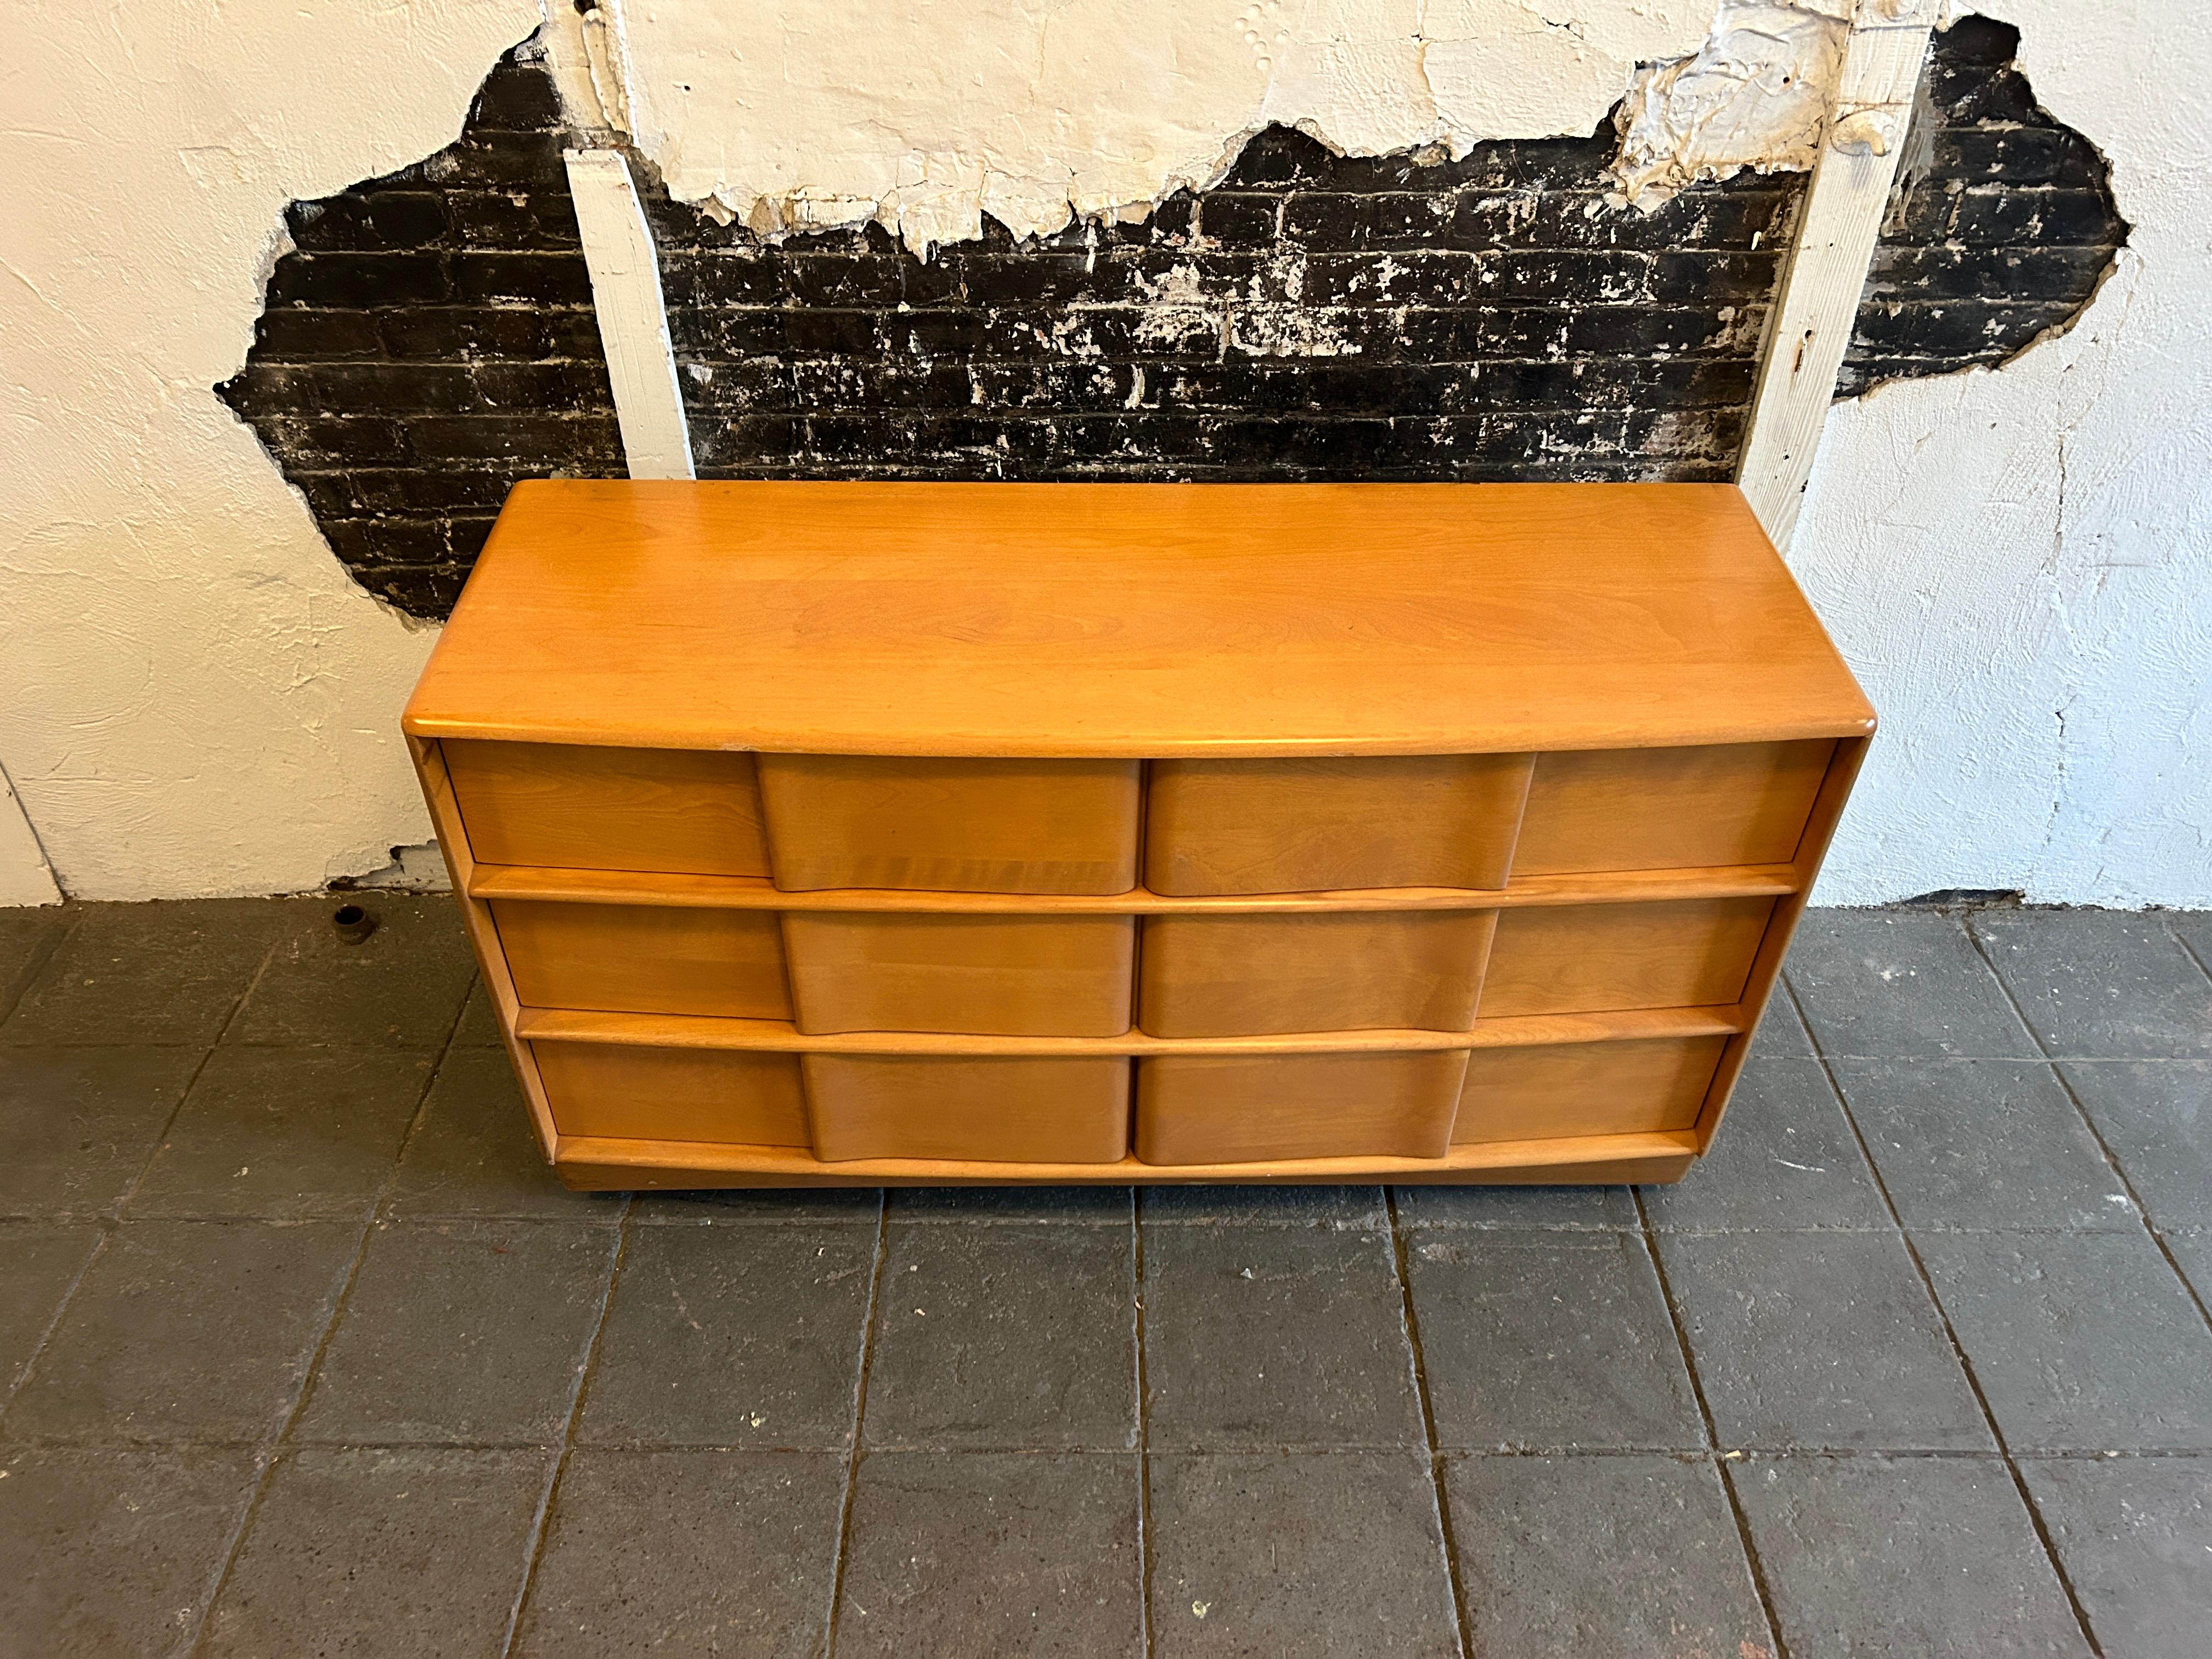 Mid-Century Modern Blonde solid Maple 6 Drawer dresser by Heywood Wakefield. Good Vintage Condition clean inside and out. Drawers slide smooth. Very unique mid century and deco design. Labeled in drawer. Located In Brooklyn NYC.